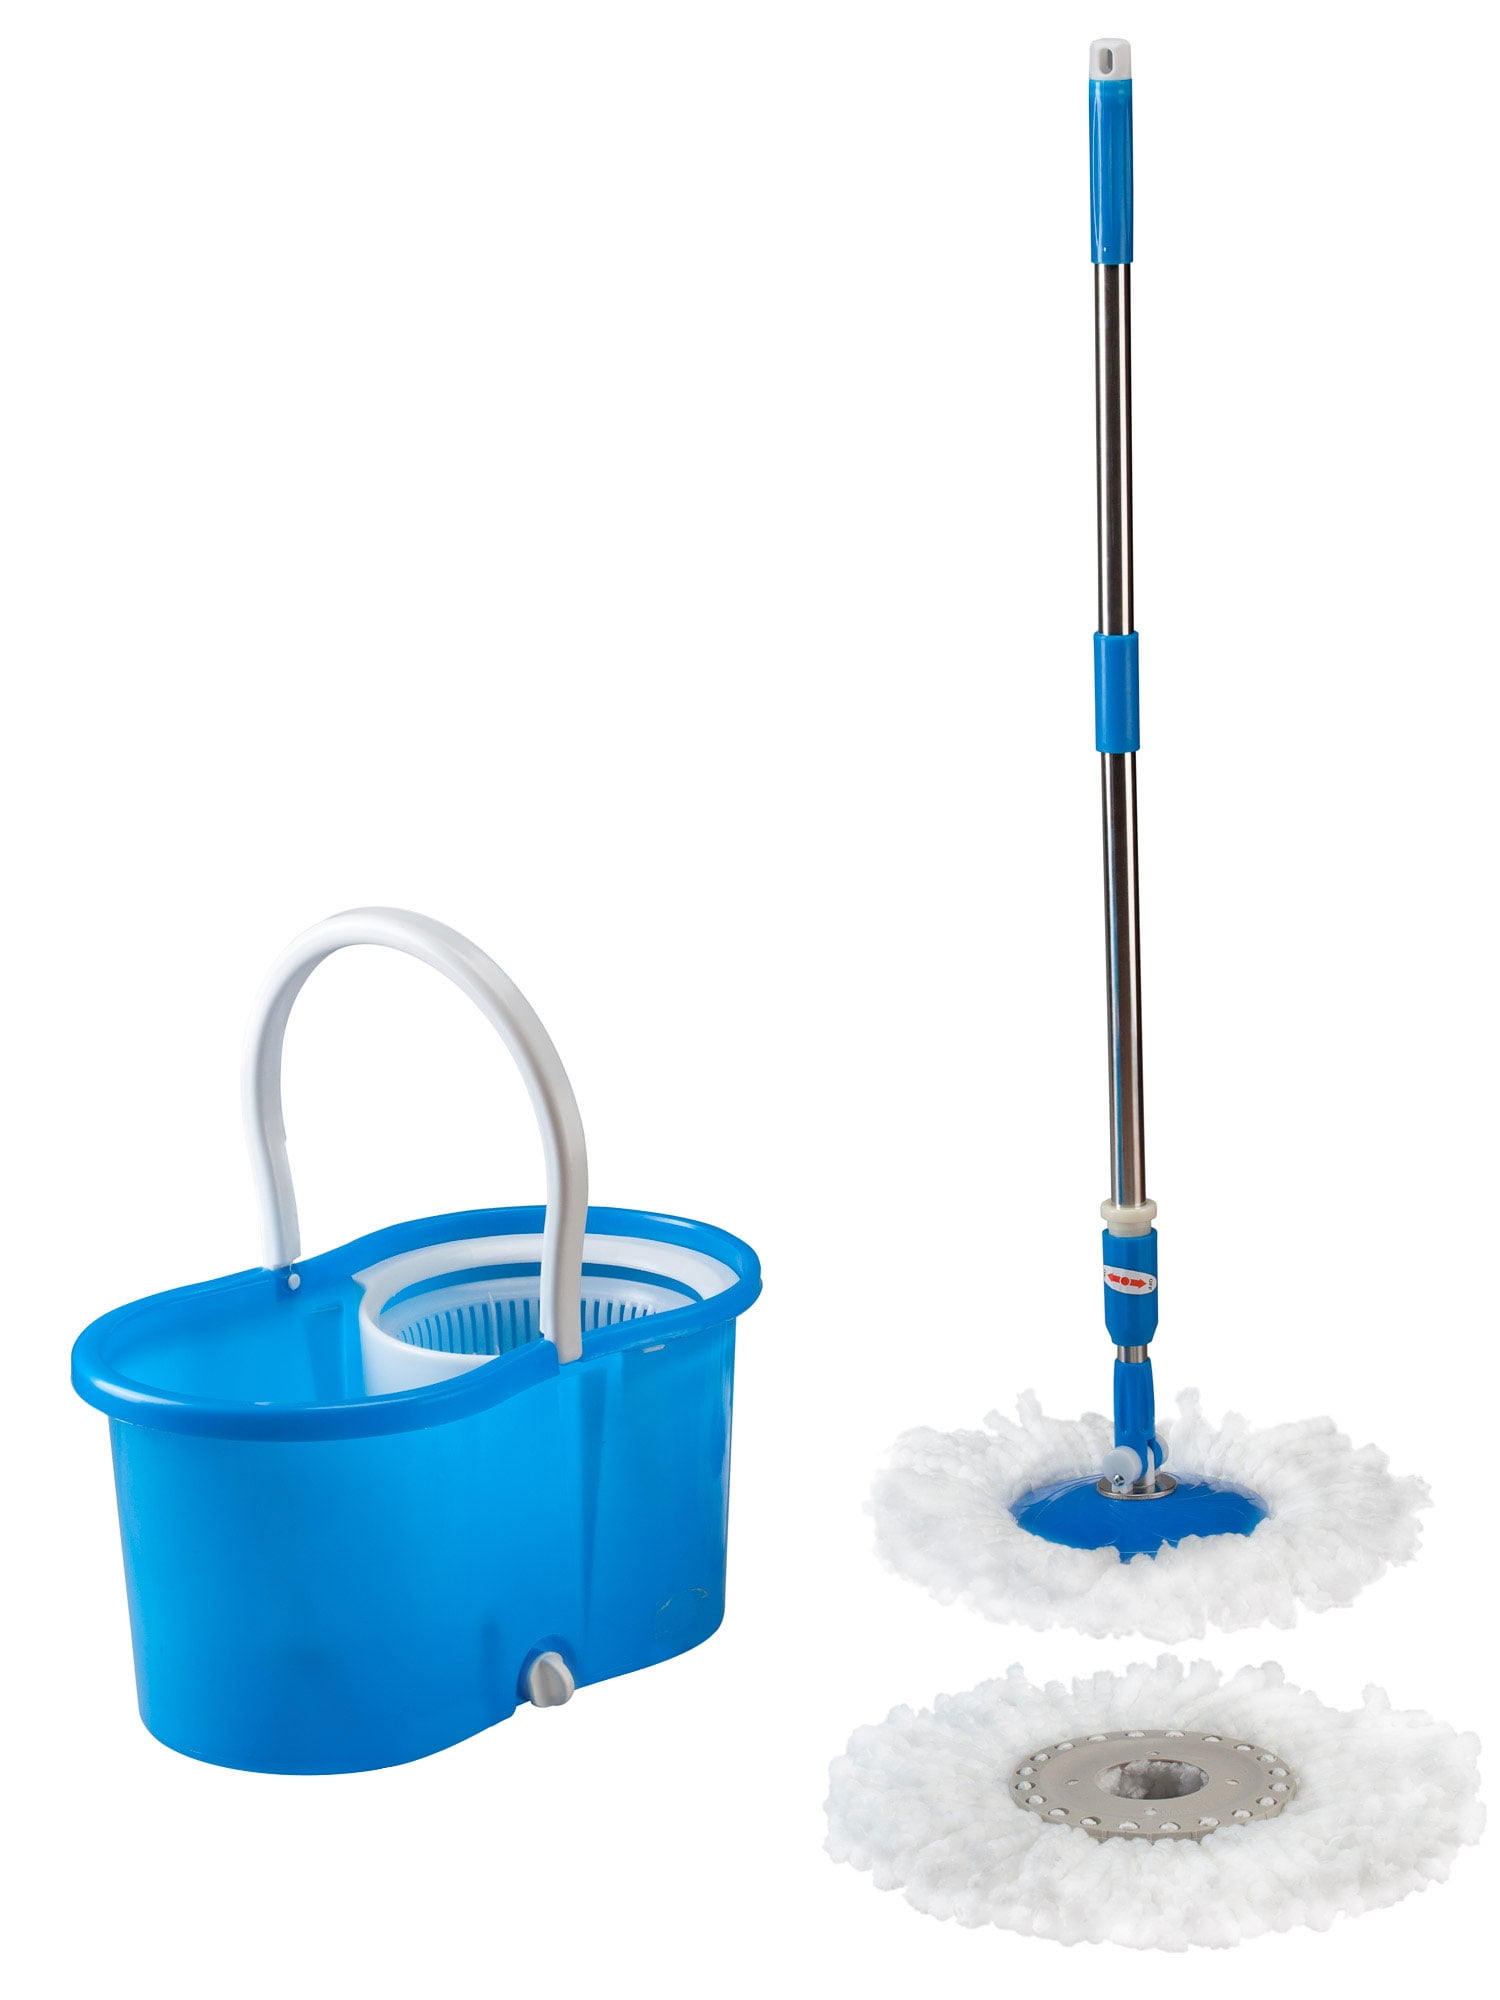 360 DEGREE SPINNING MOP BUCKET HOME CLEANER CLEANING WITH 2 MICROFIBER MOP HEADS 